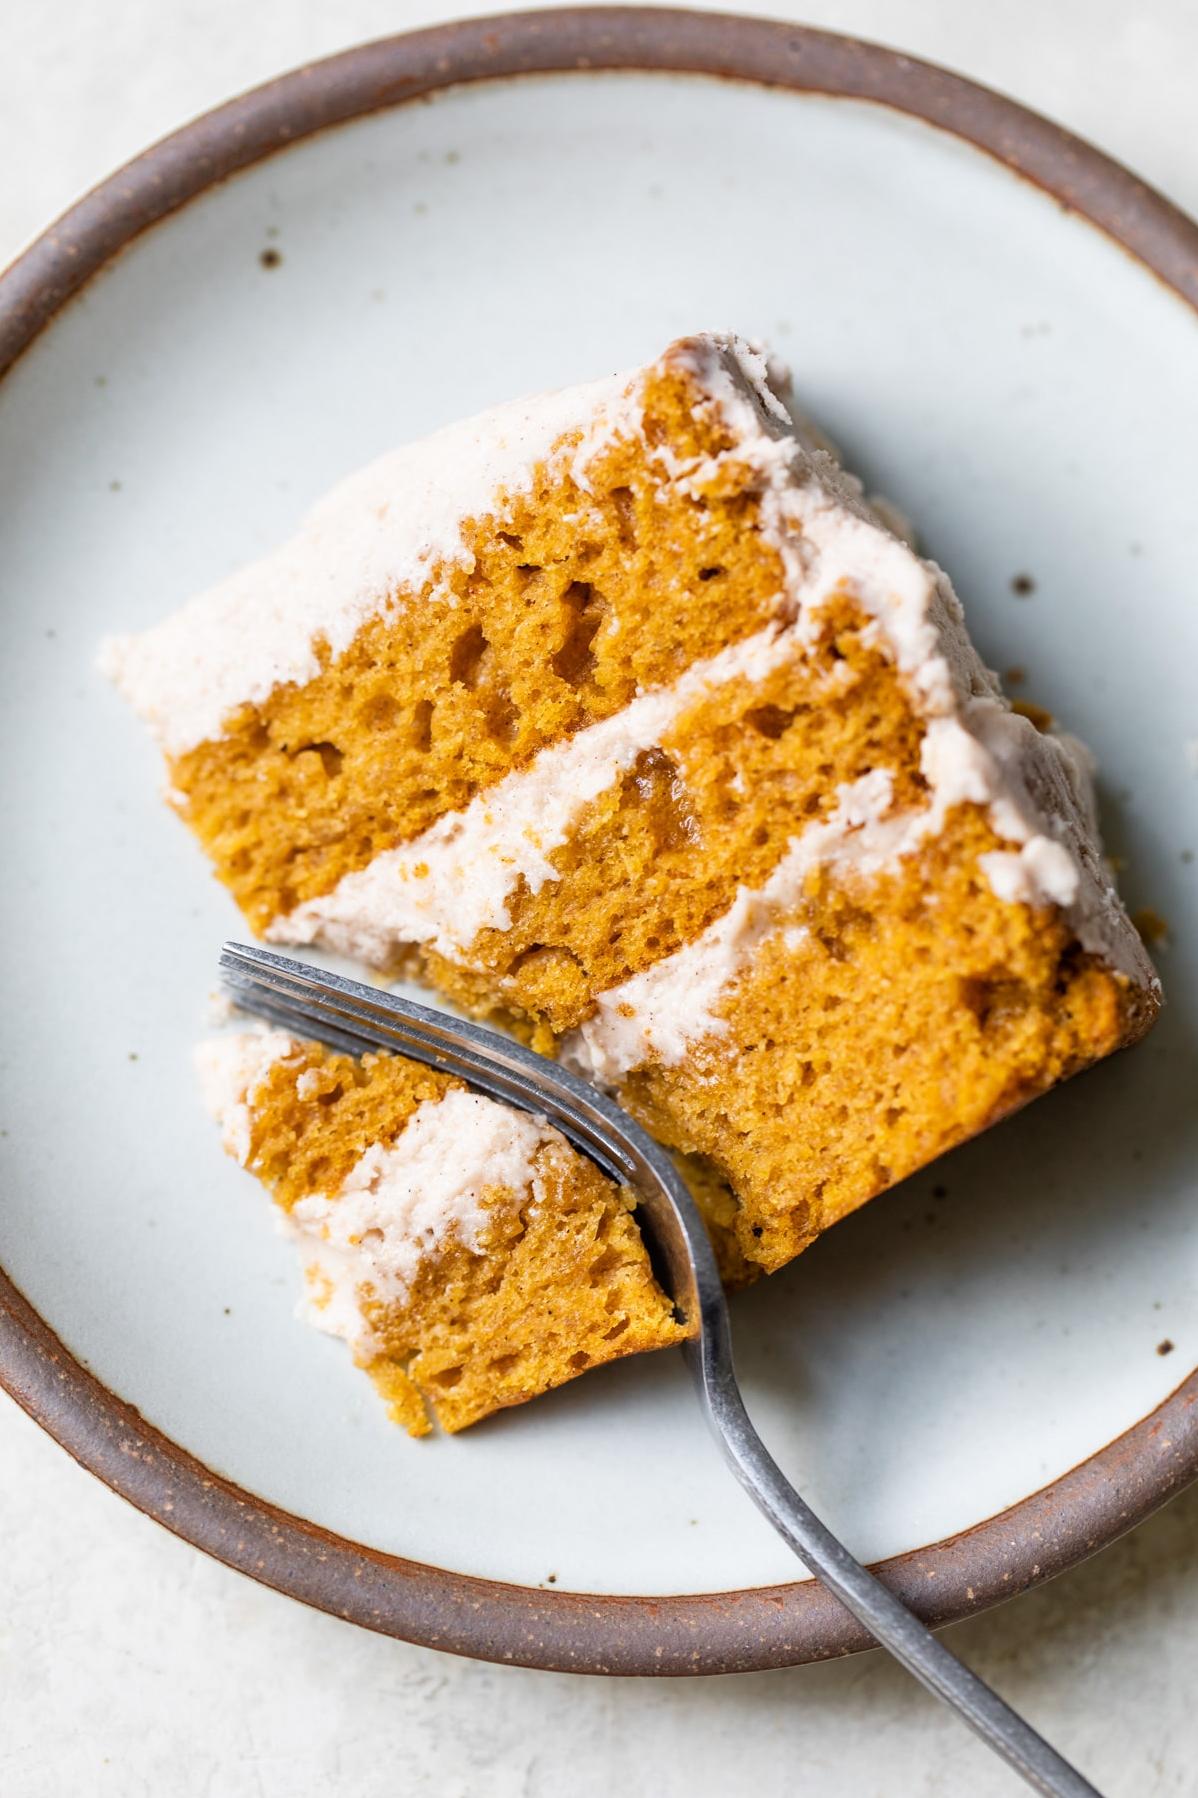  Nothing beats the aroma of fresh-baked pumpkin cake filling your home